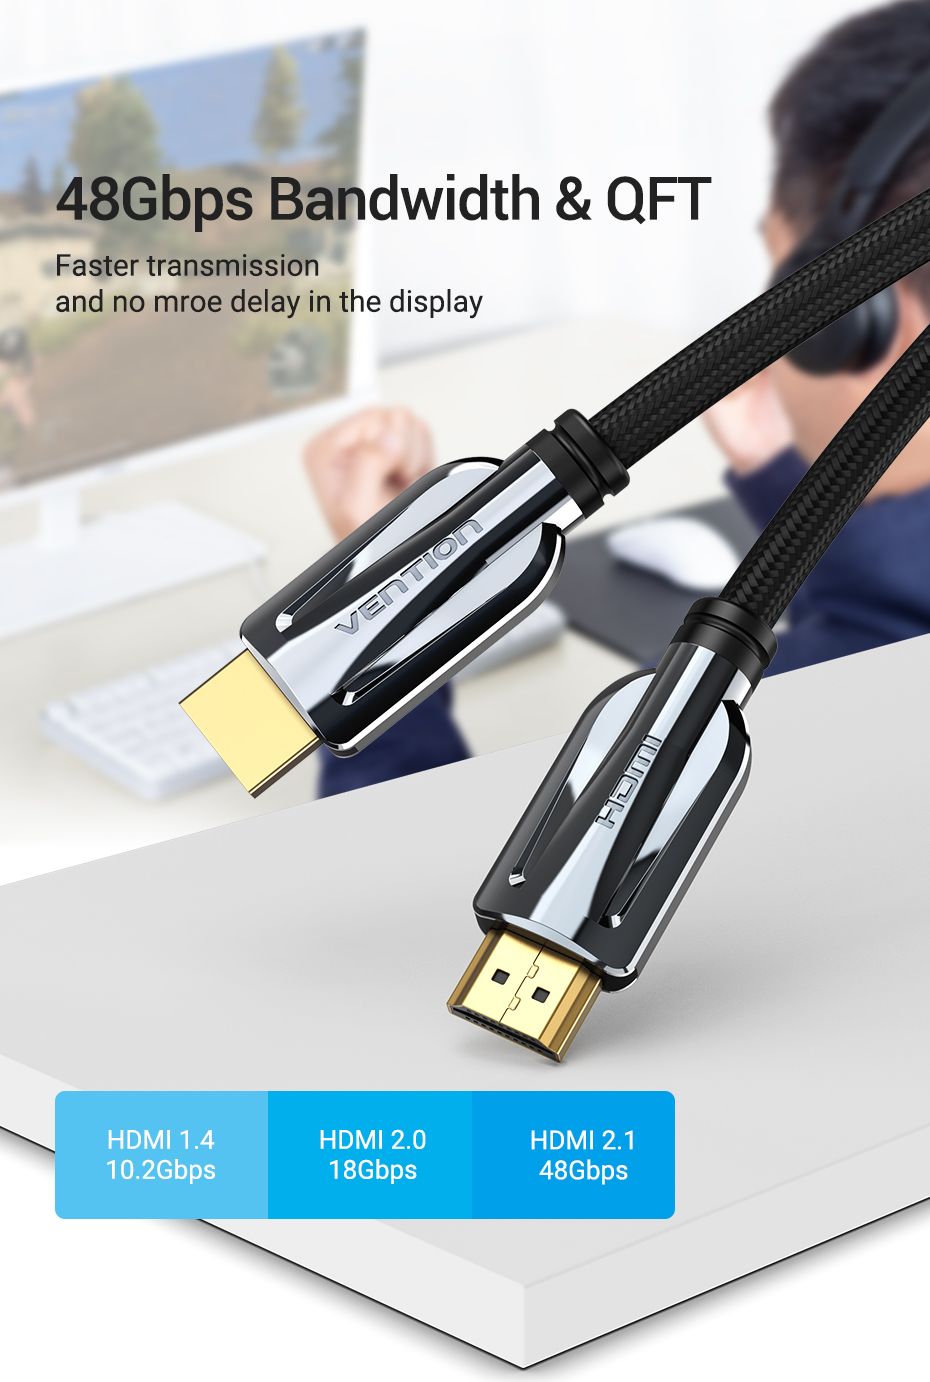 Vention-HDMI-21-4K-8K-120Hz-3D-High-Speed-48Gbps-Audio-Video-Data-Cable-Adapter-for-TV-PS4-Splitter--1643708